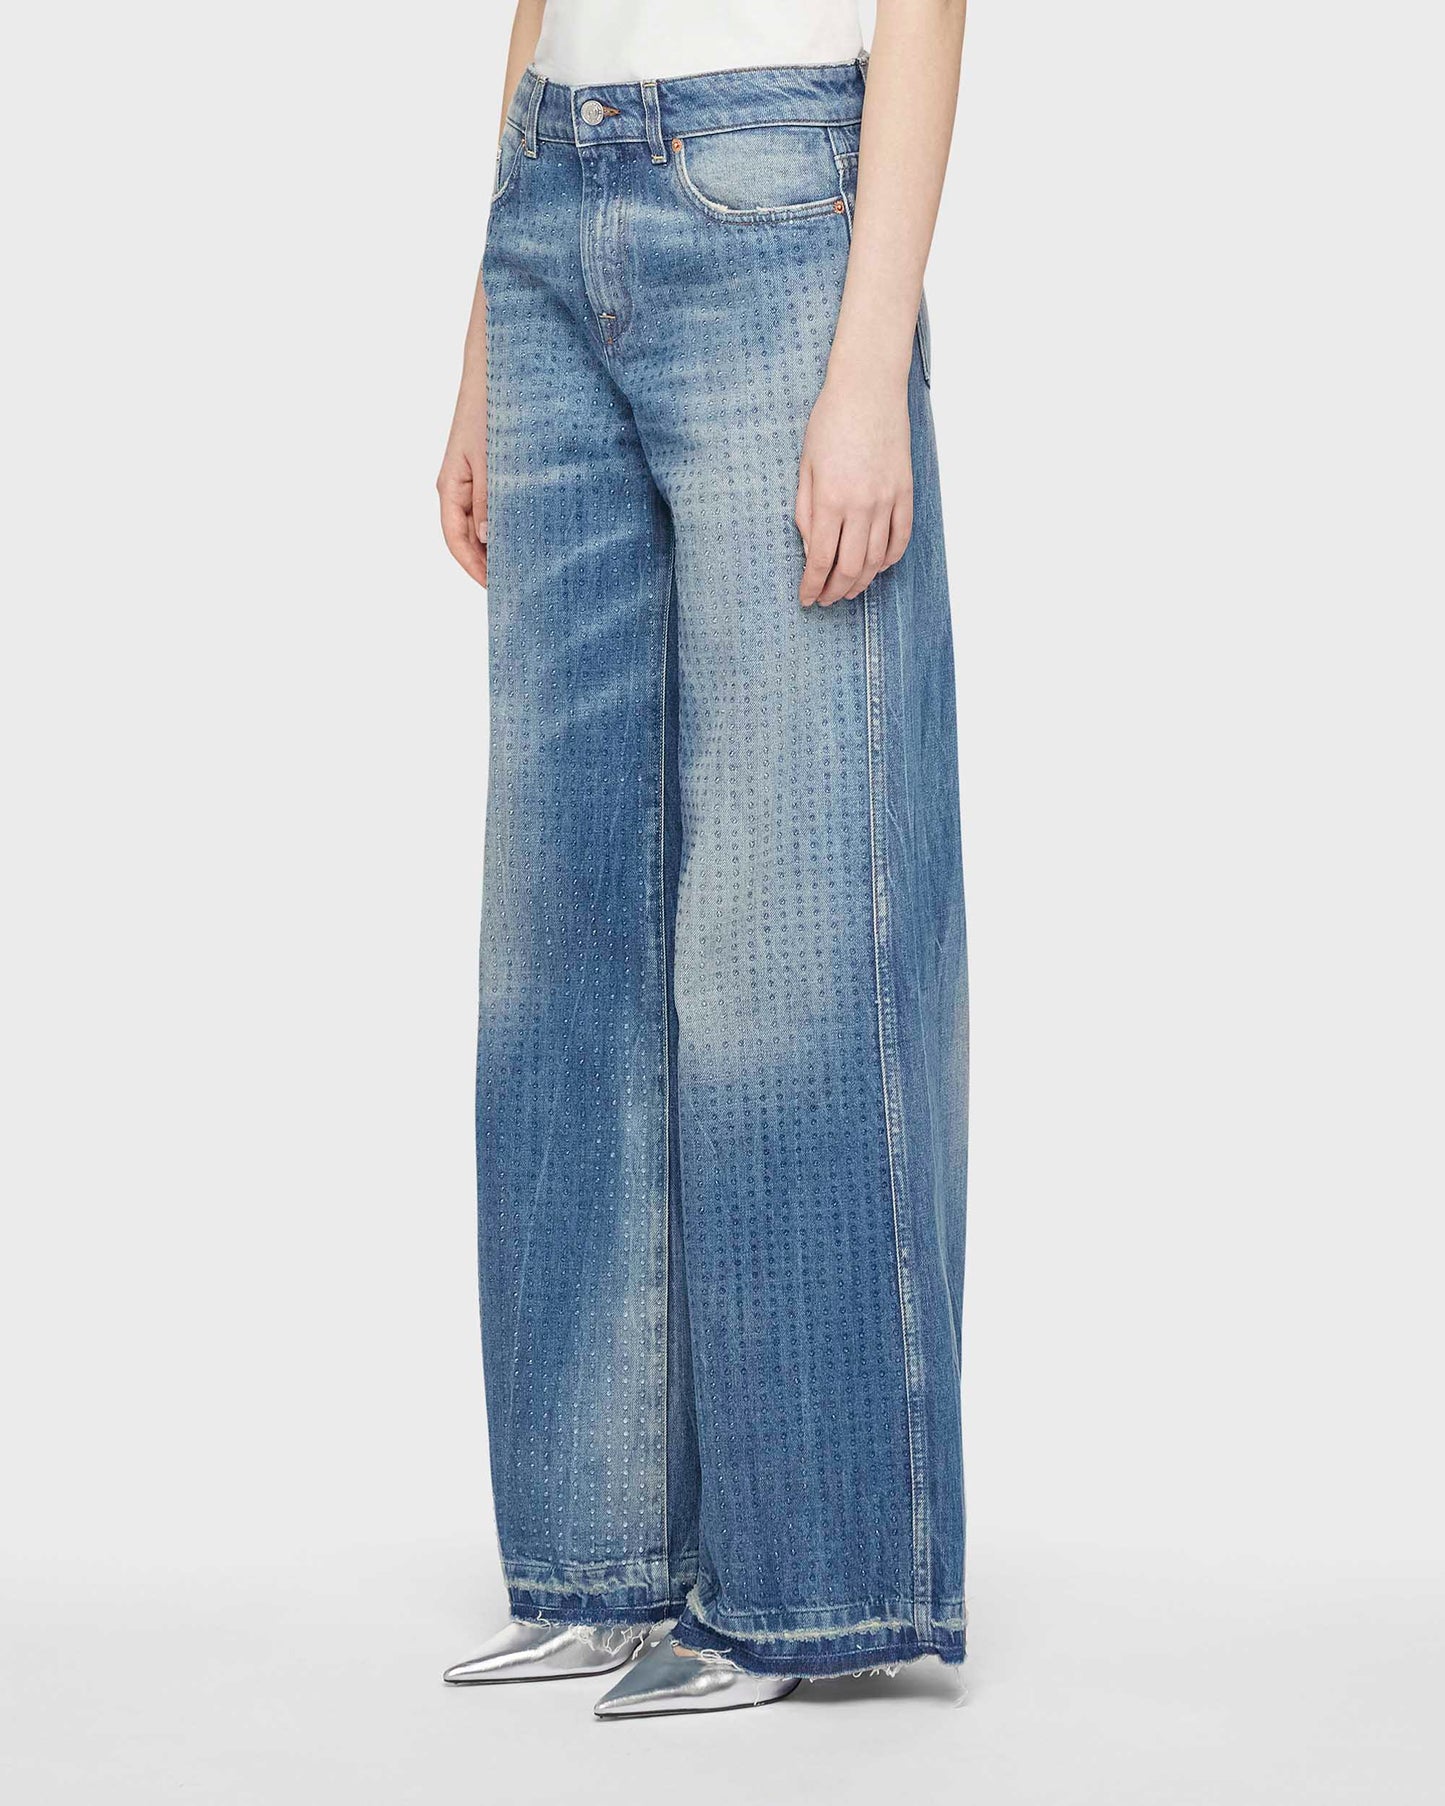 Thames jeans palazzo con strass